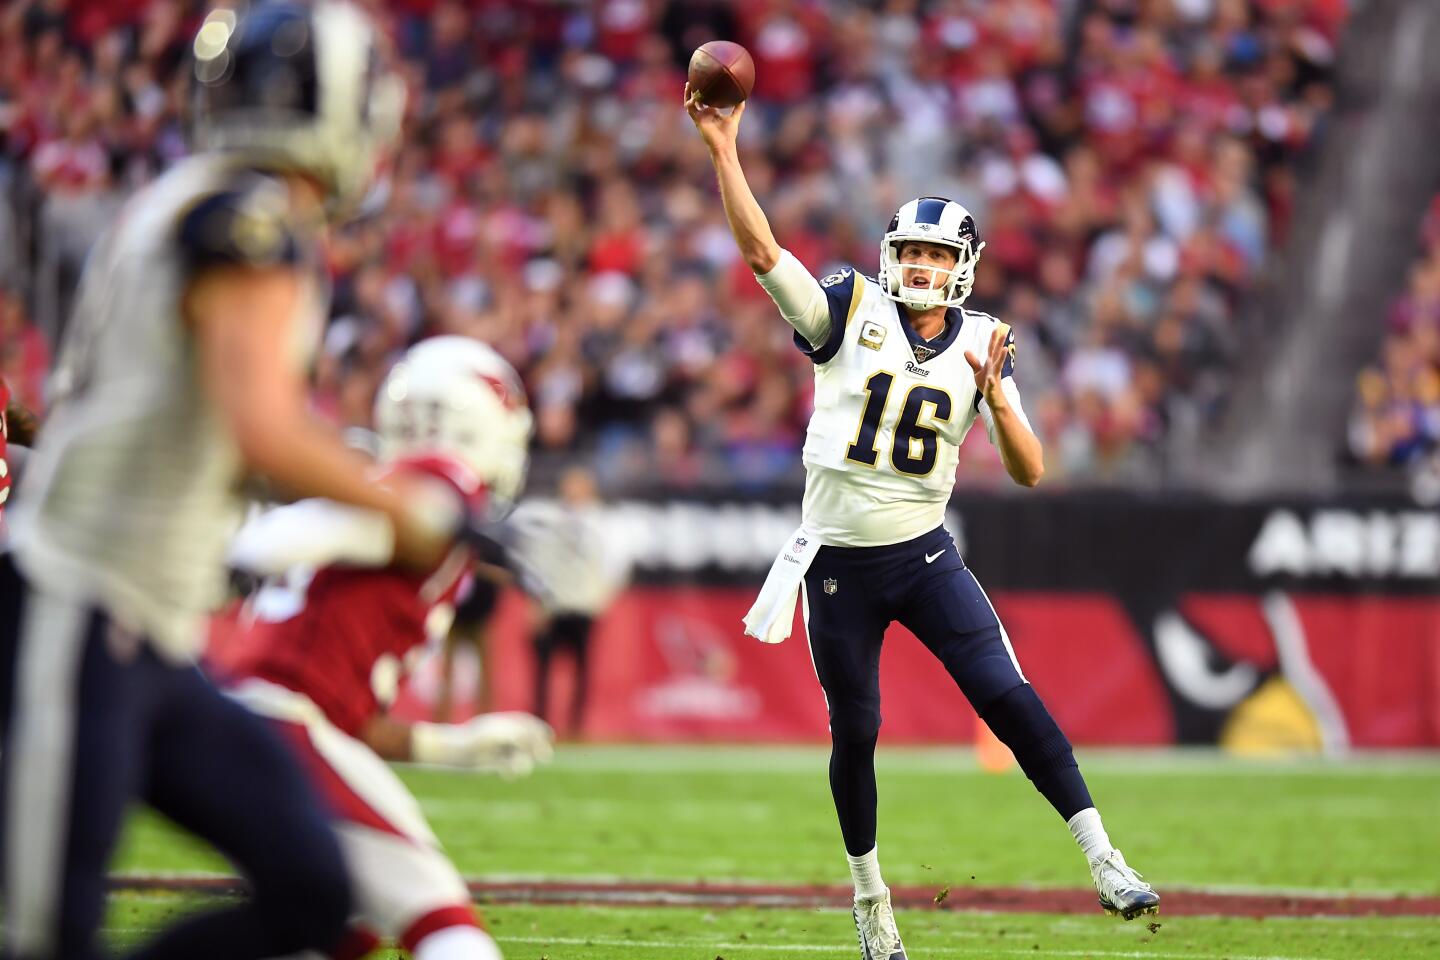 Rams quarterback Jared Goff completes a pass to receiver Cooper Kupp.